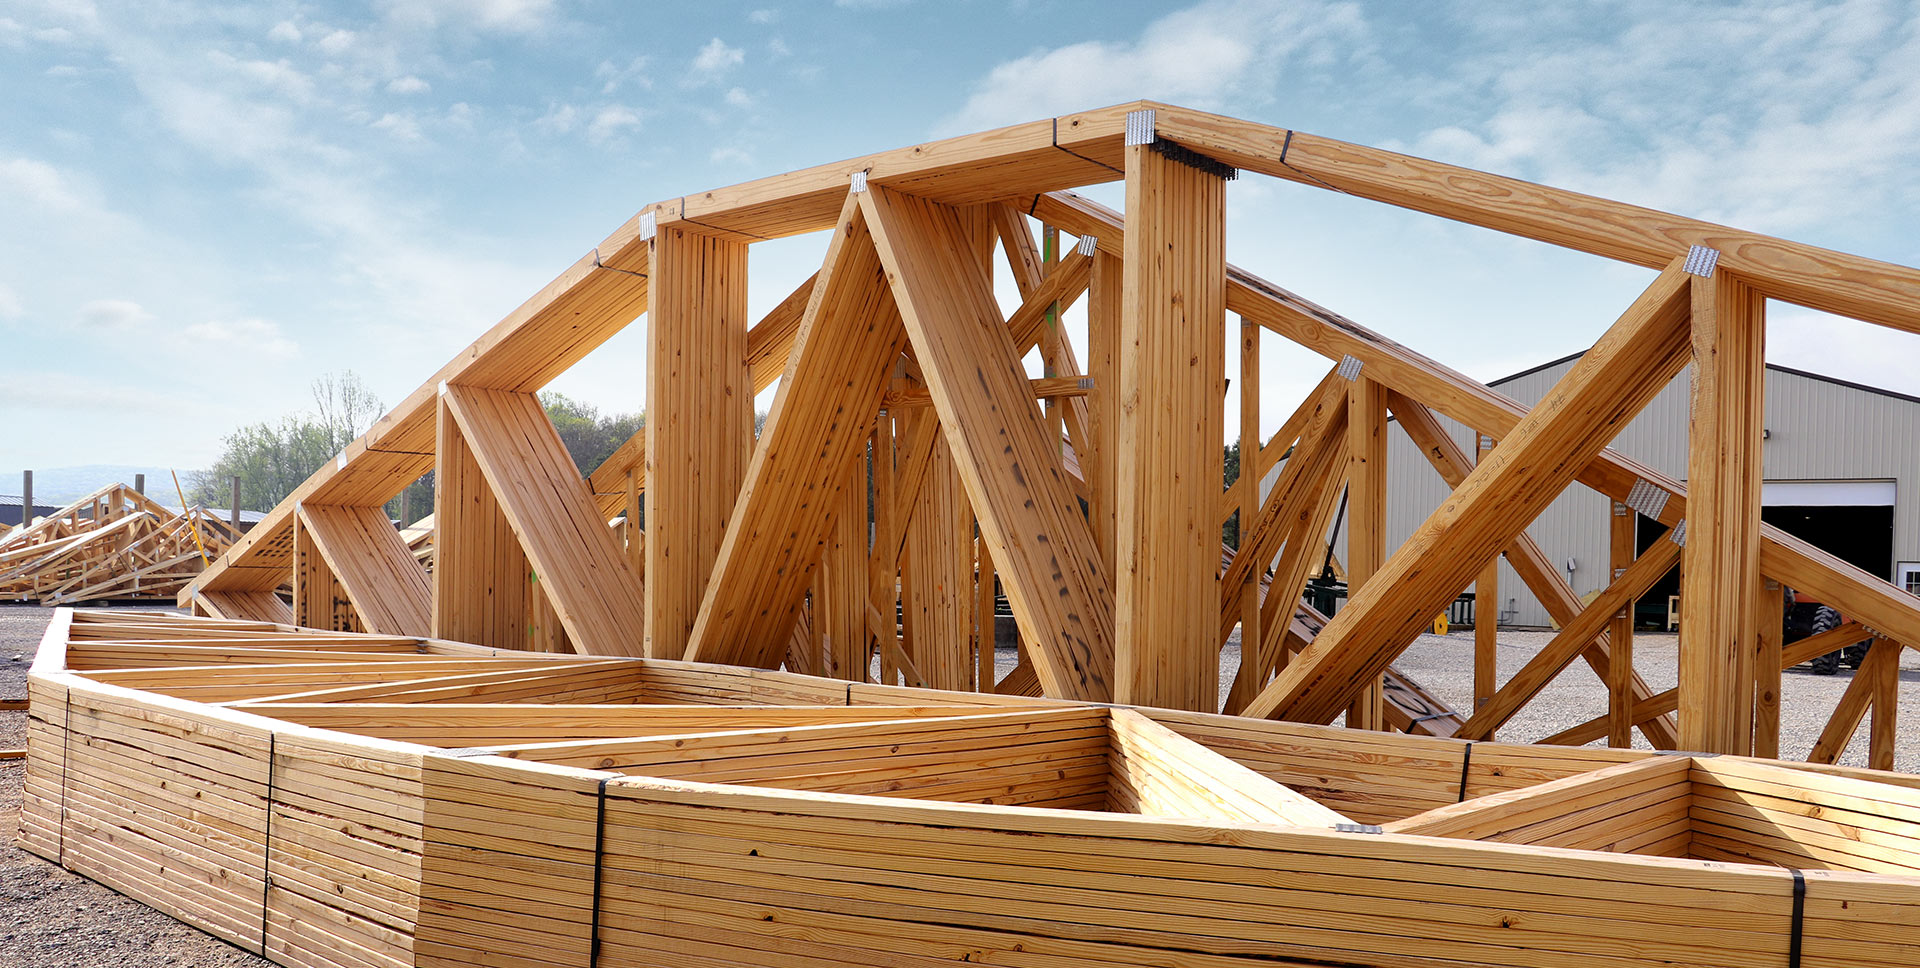 Trusses by Mountain view construction in Tennessee